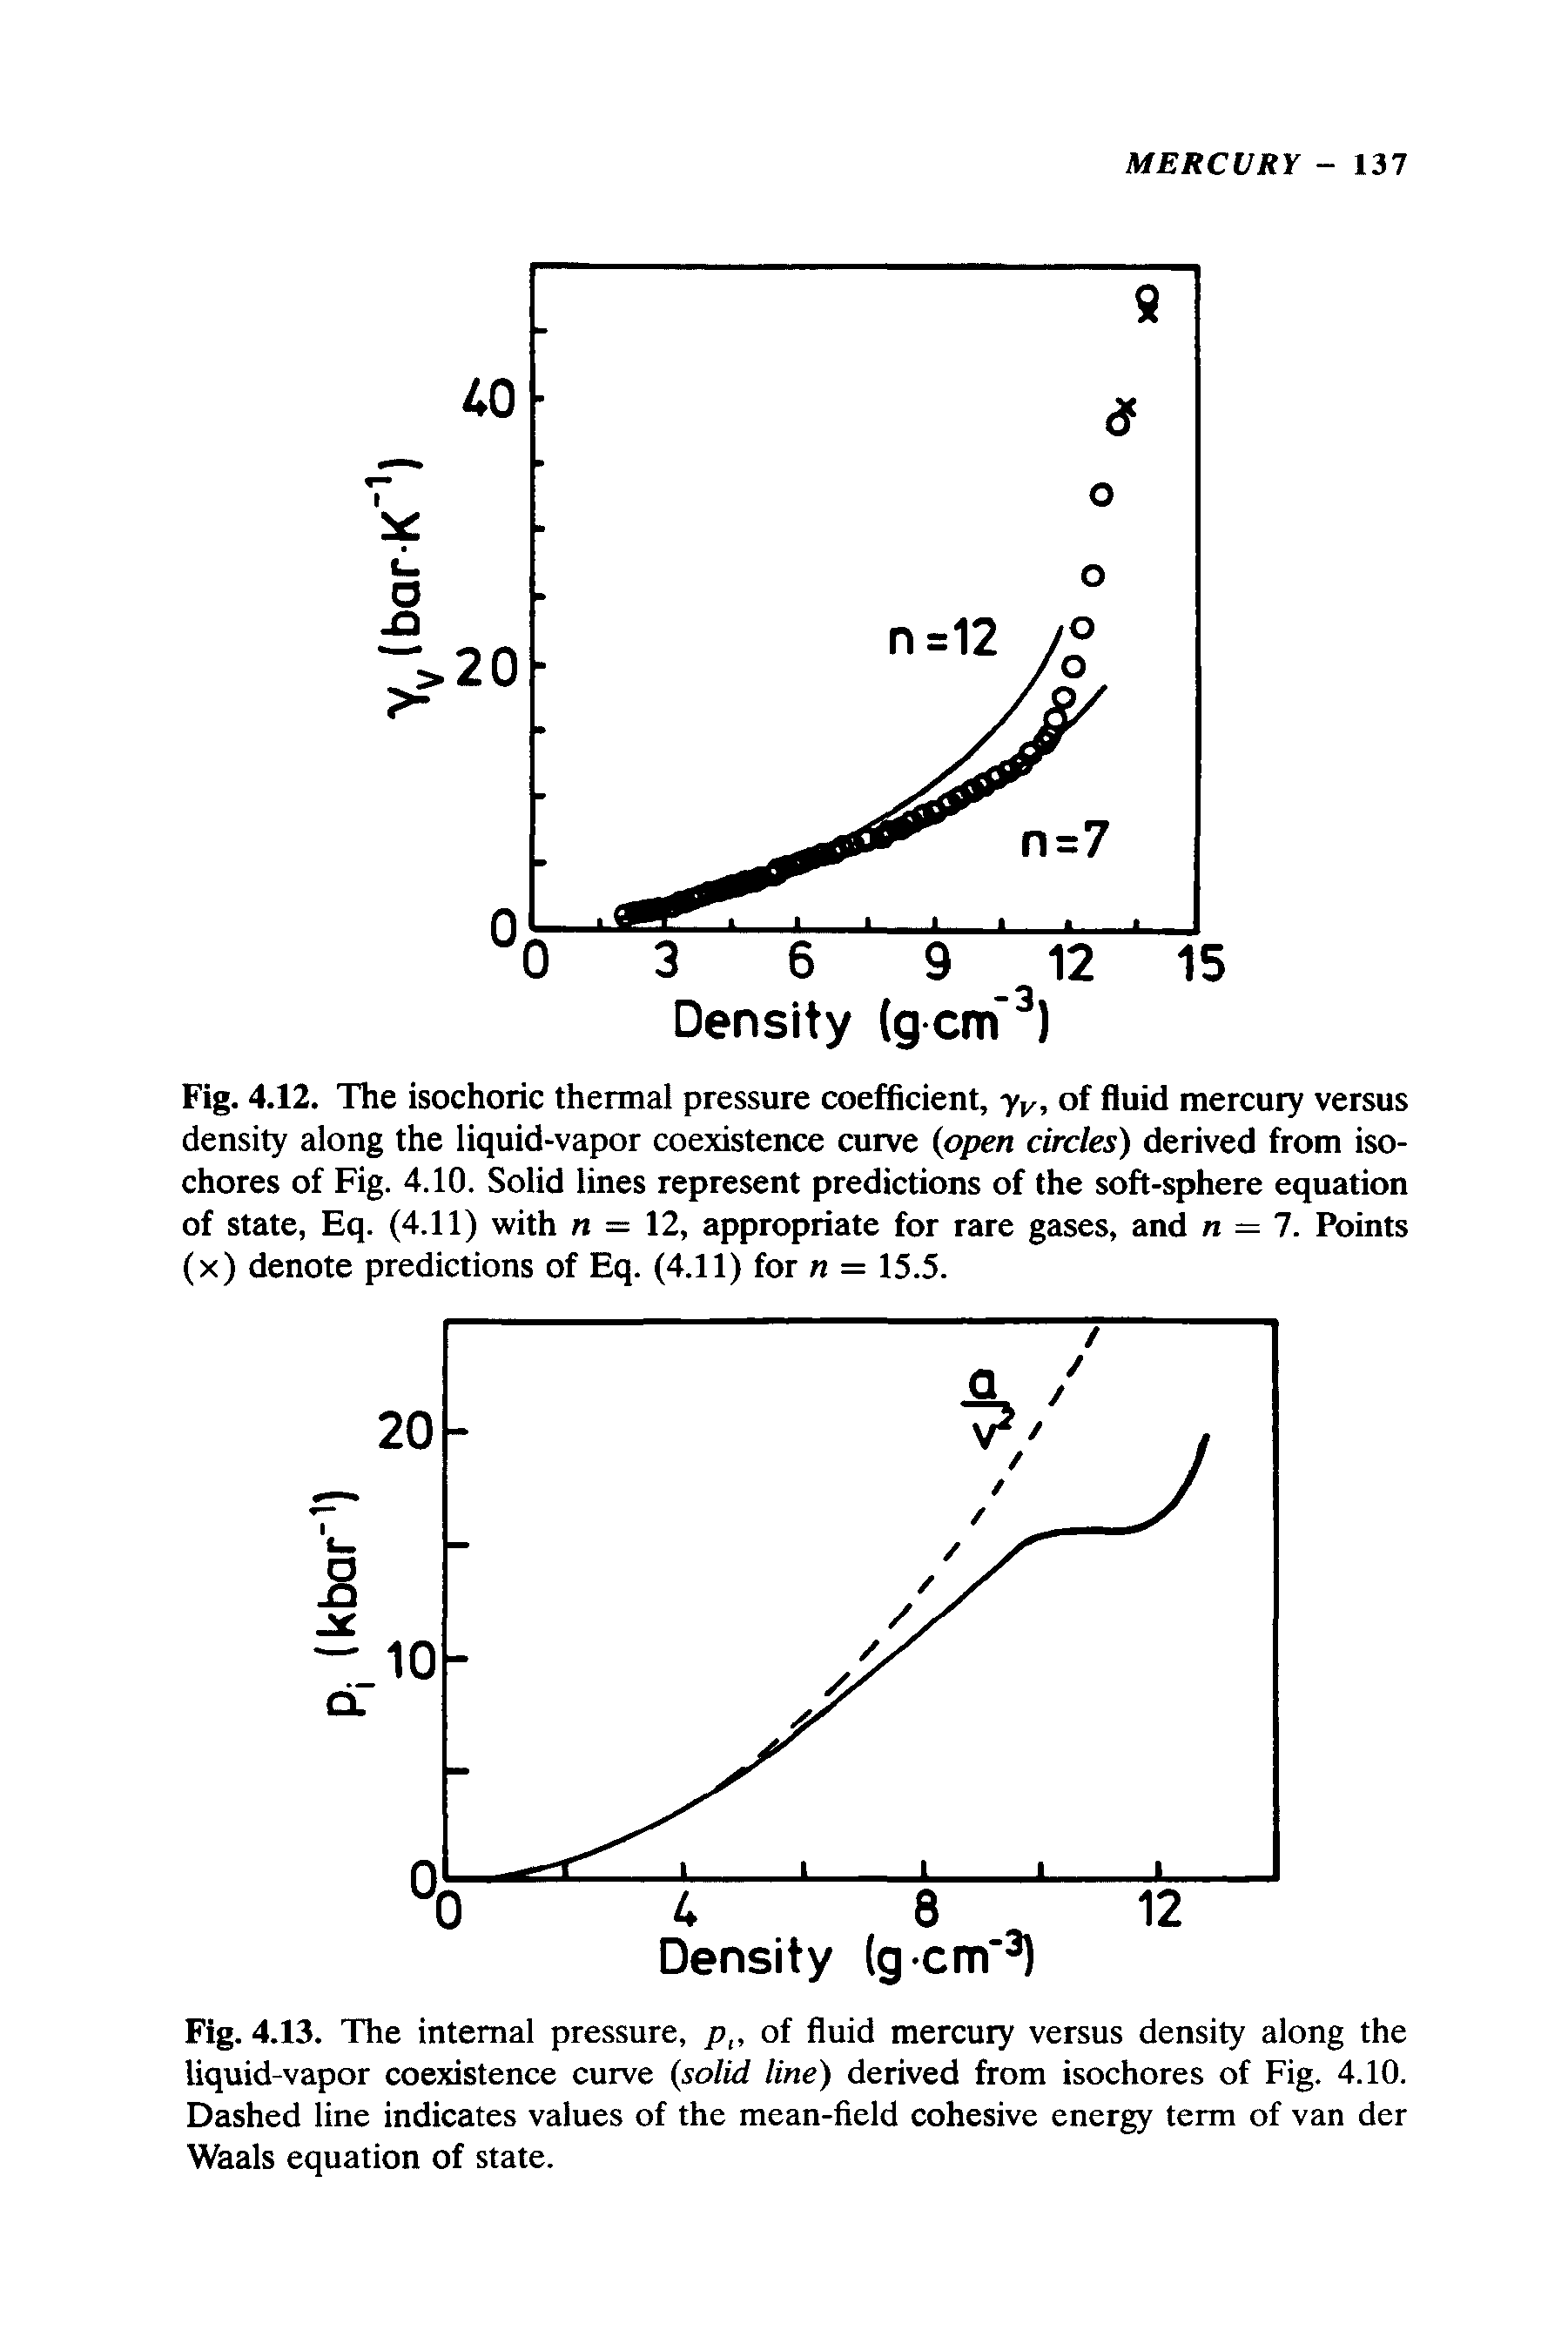 Fig. 4.12. The isochoric thermal pressure cx>efiicient, yy, of fluid mercury versus density along the liquid-vapor coexistence curve (open circles) derived from isochores of Fig. 4.10. Solid lines represent predictions of the soft-sphere equation of state, Eq. (4.11) with = 12, appropriate for rare gases, and n = 7. Points (x) denote predictions of Eq. (4.11) for n = 15.5.